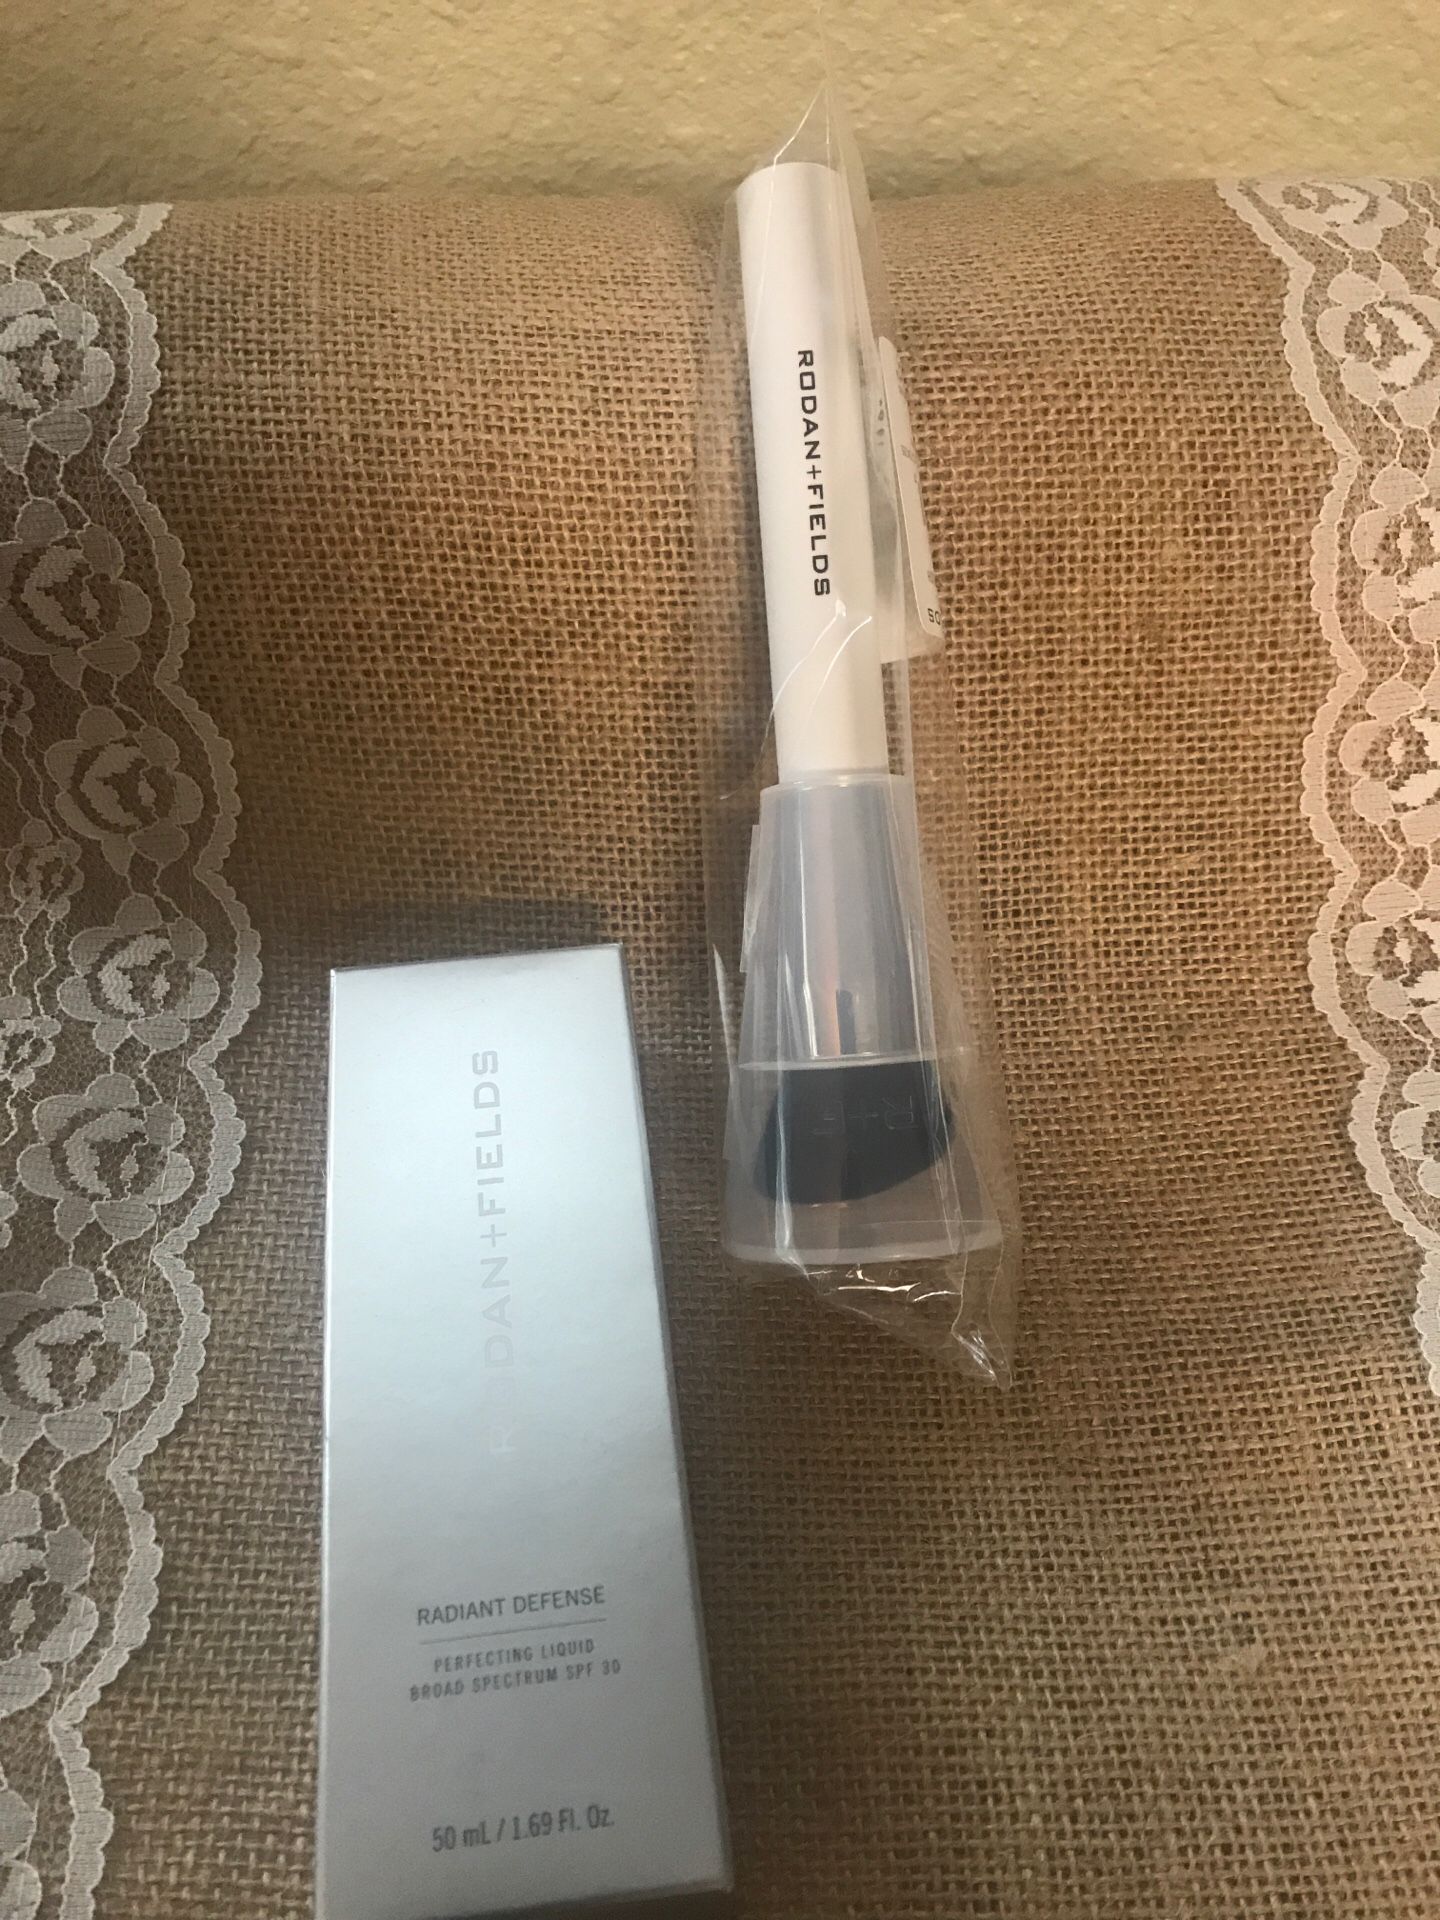 Rodan and Fields Radiant Defense Sand, Brush included. New